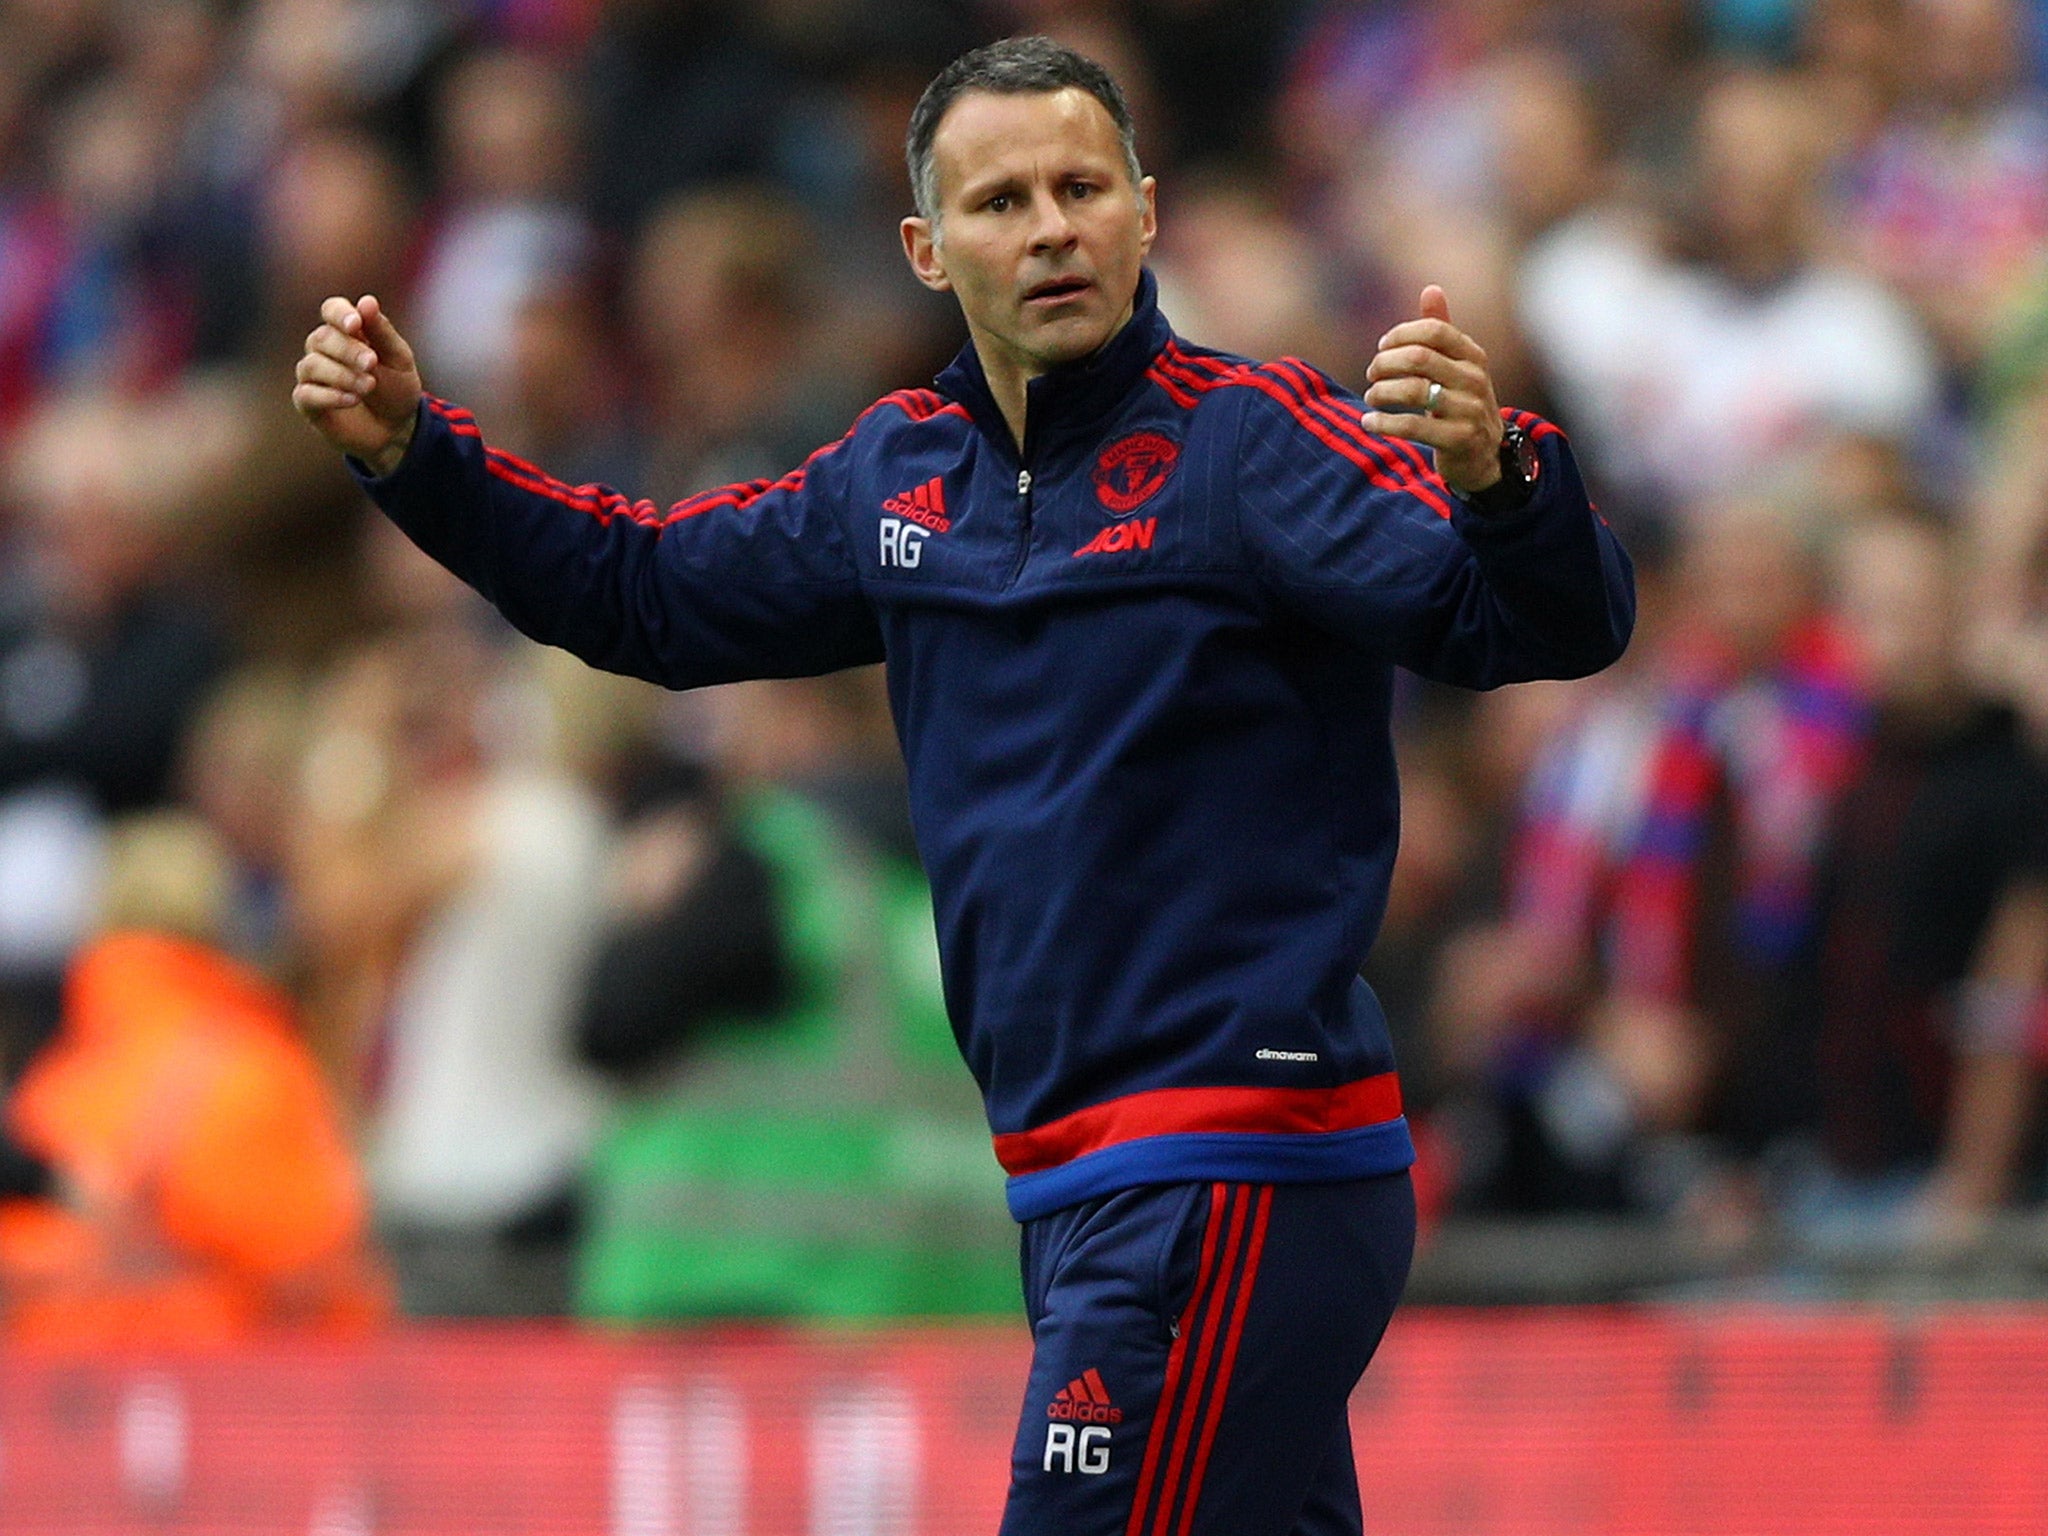 Ryan Giggs could leave Manchester United after Jose Mourinho's appointment as manager